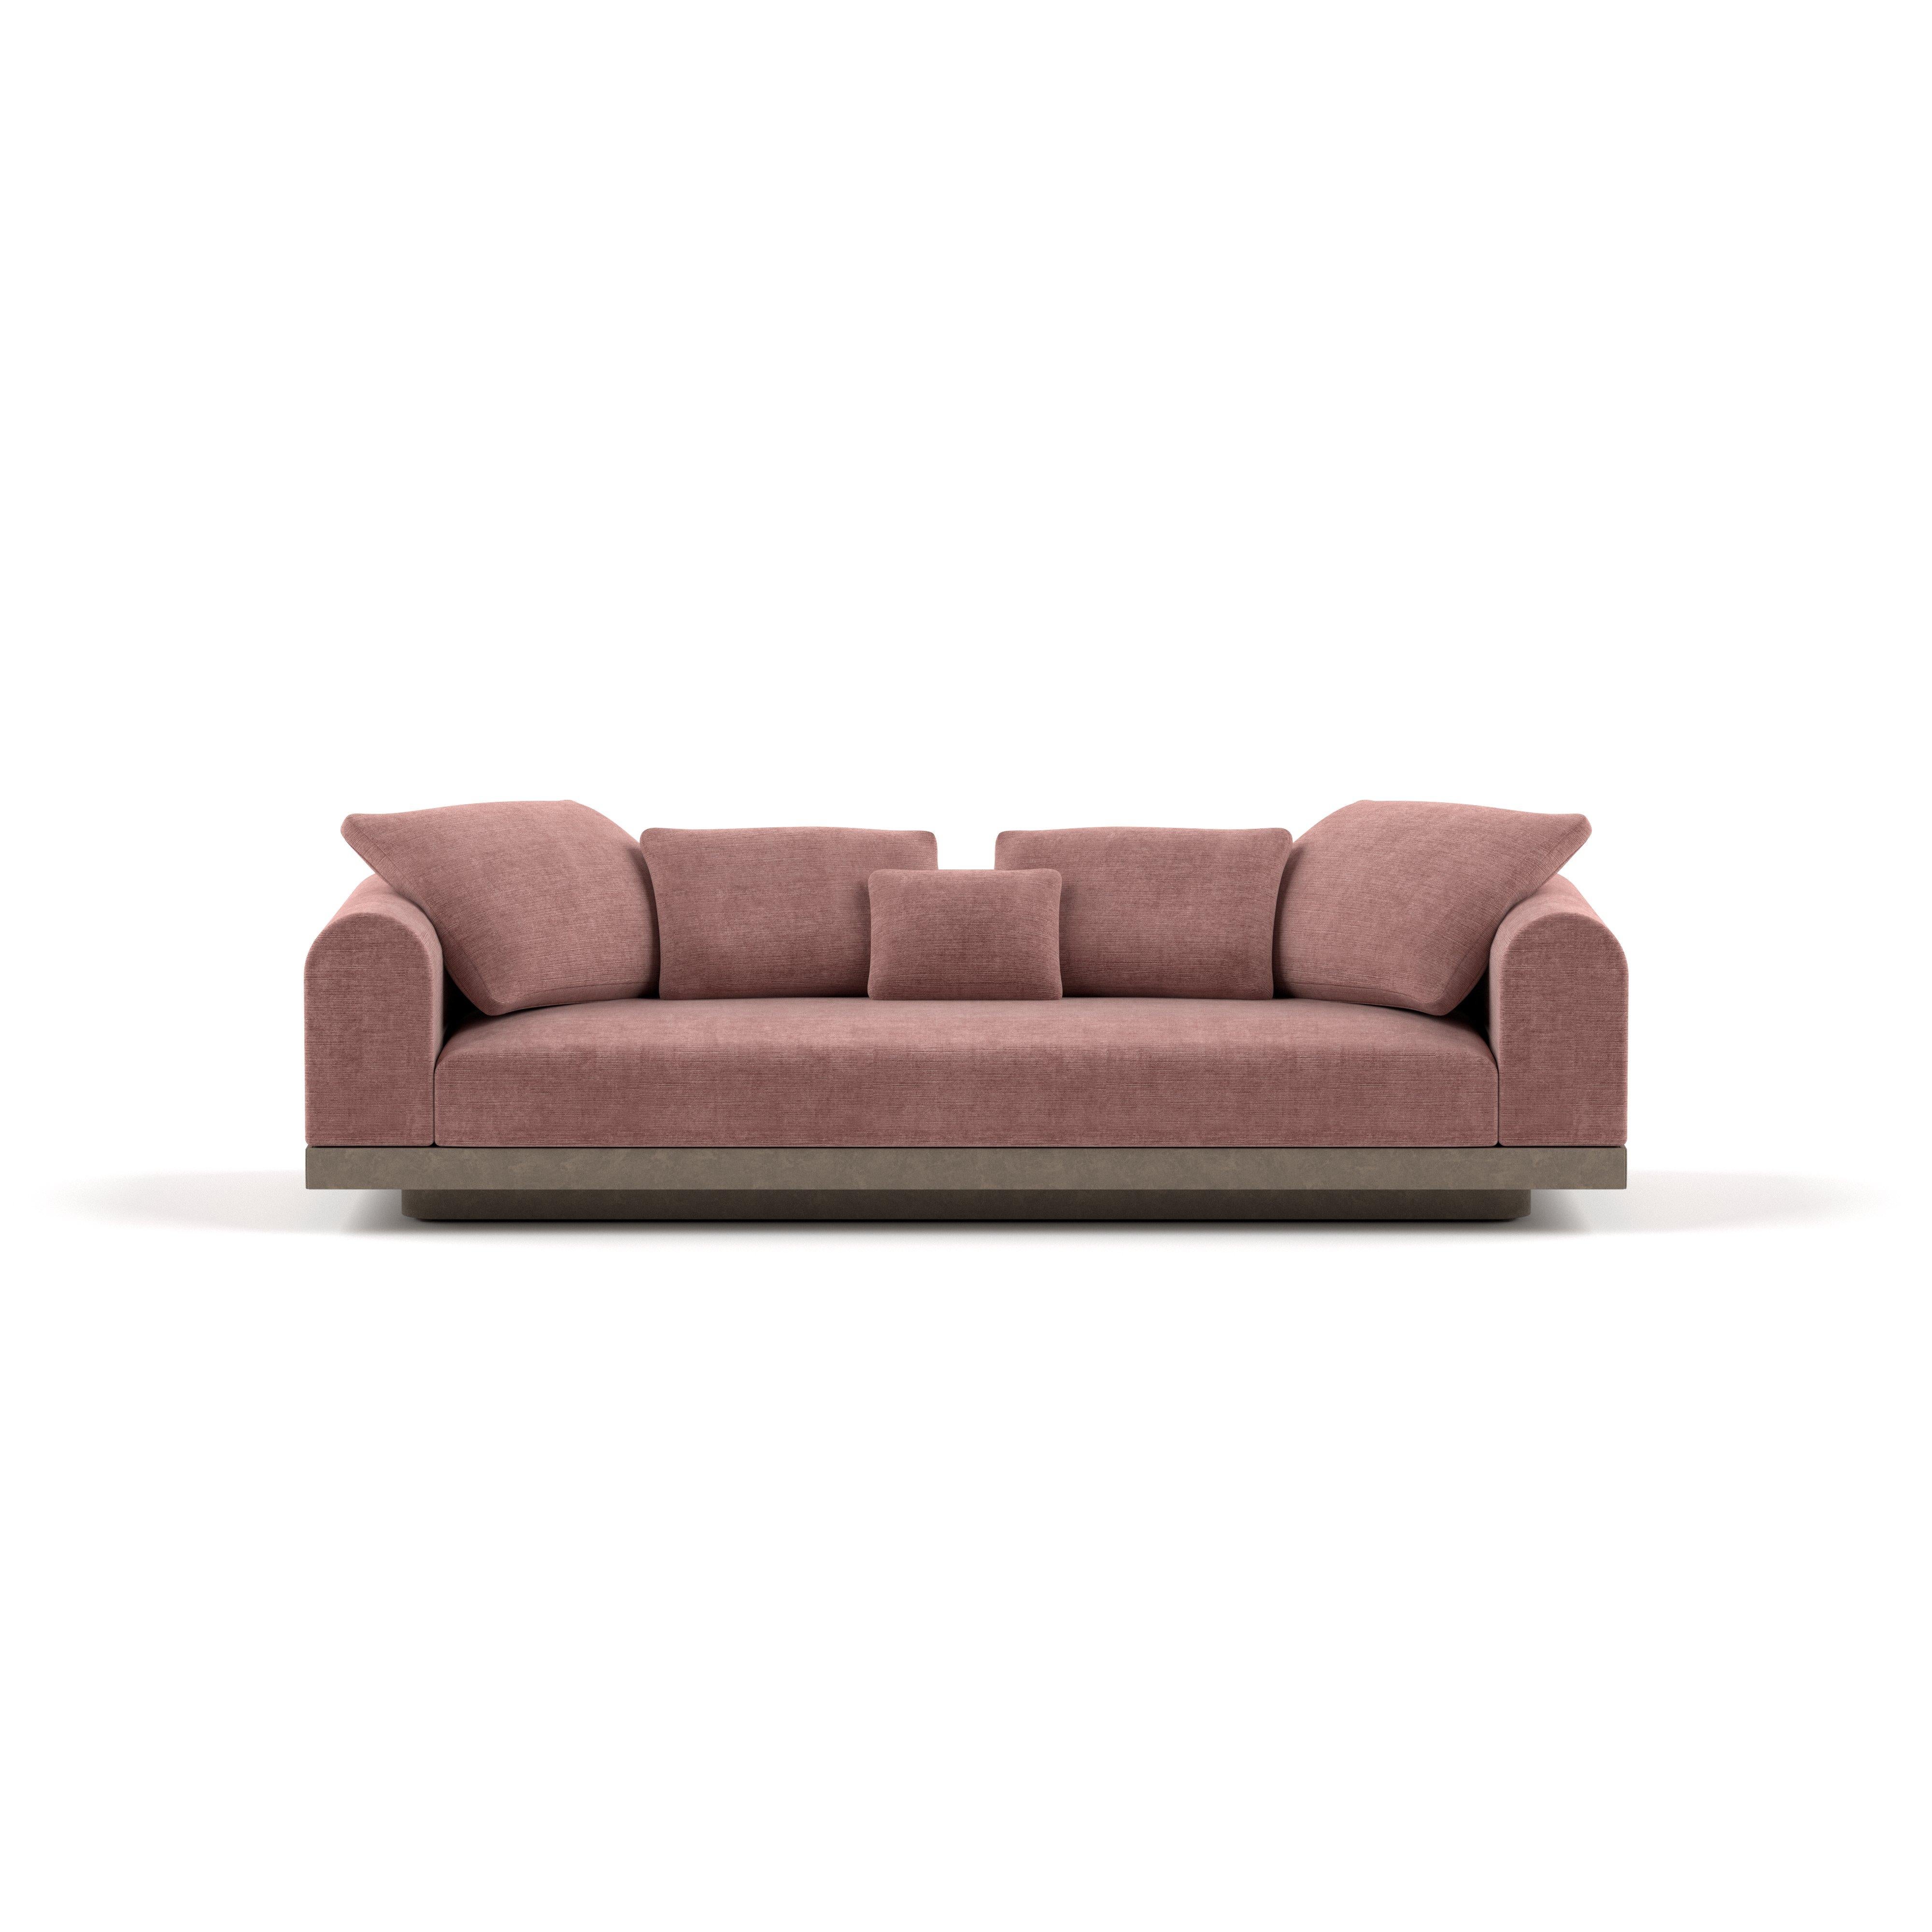 Contemporary sofa 'Aqueduct' by Poiat.
Dimensions: small version : H. 77 cm x W. 255.5 cm x D. 102 cm (SH 40 cm).

Aqueduct collection 2022 by Timo Mikkonen & Antti Rouhunkoski.

Upholstery: Dedar - Pergamena 017
Plinth: high plinth.

The